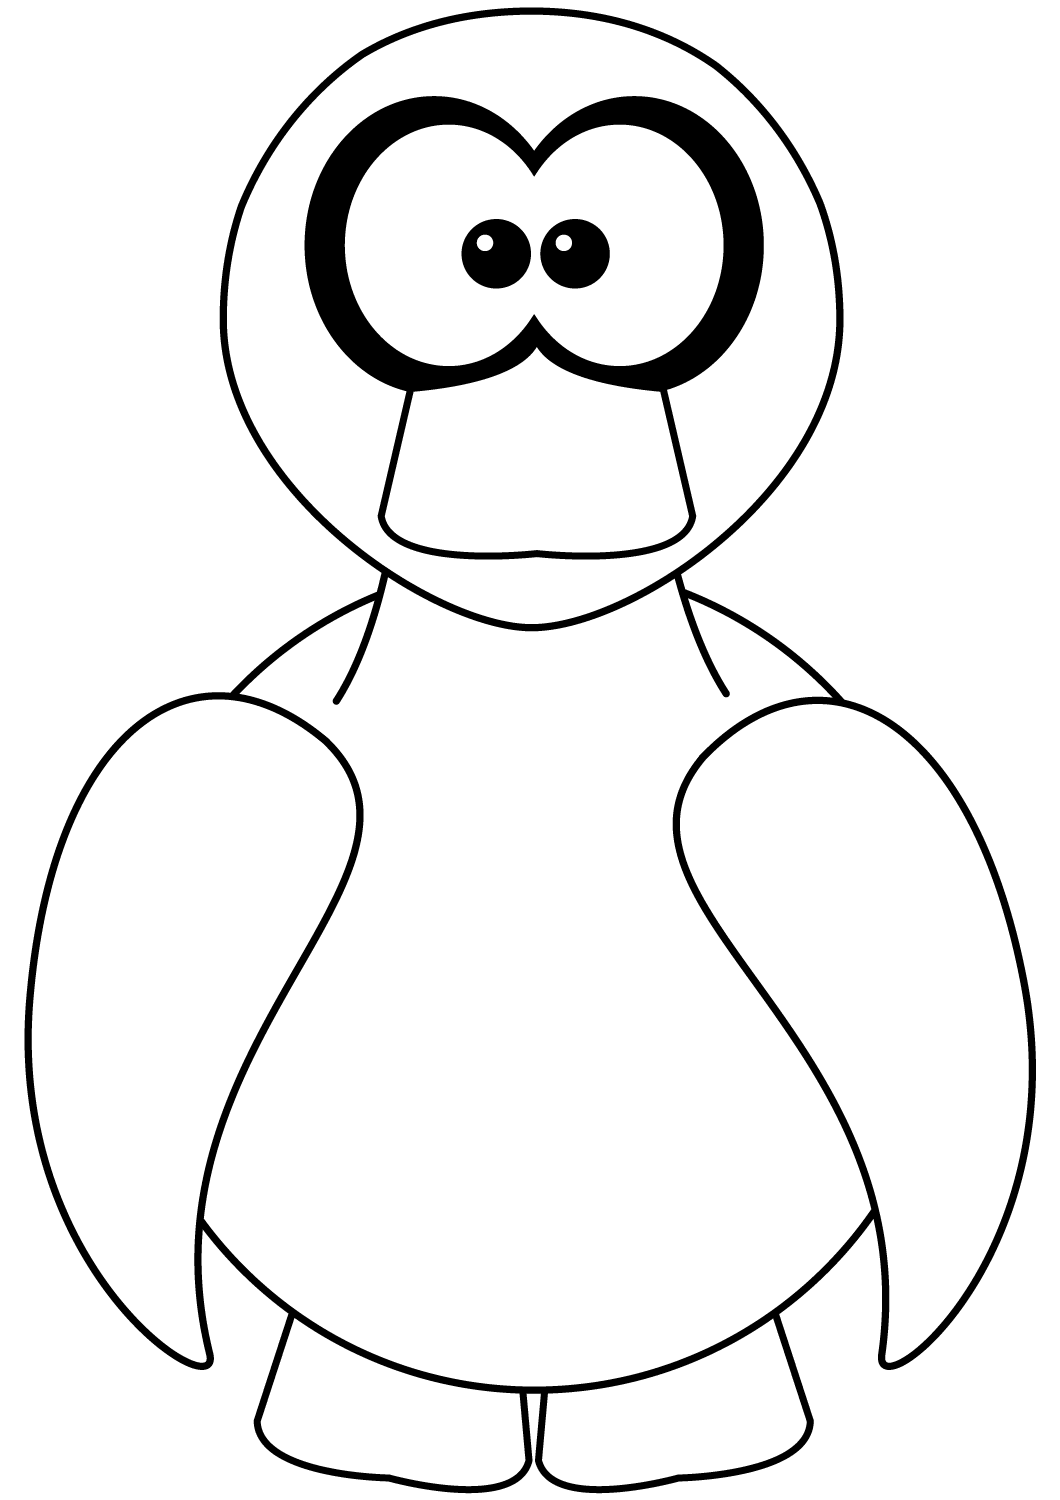 Funny Canard duck has black round eyes Coloring Pages